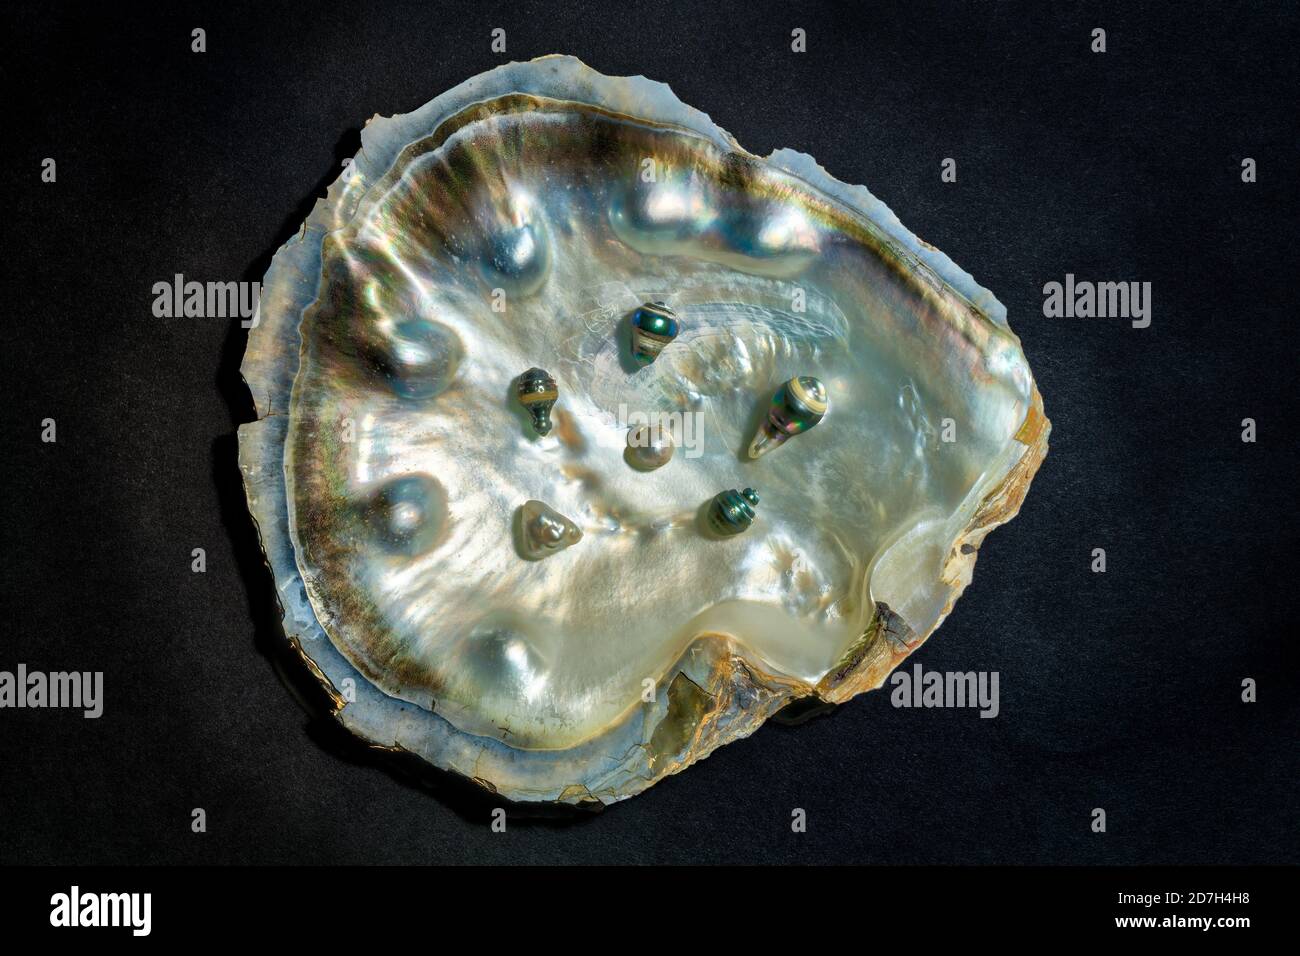 A black-lipped oyster shell, with various odd-shaped black pearls inside Stock Photo